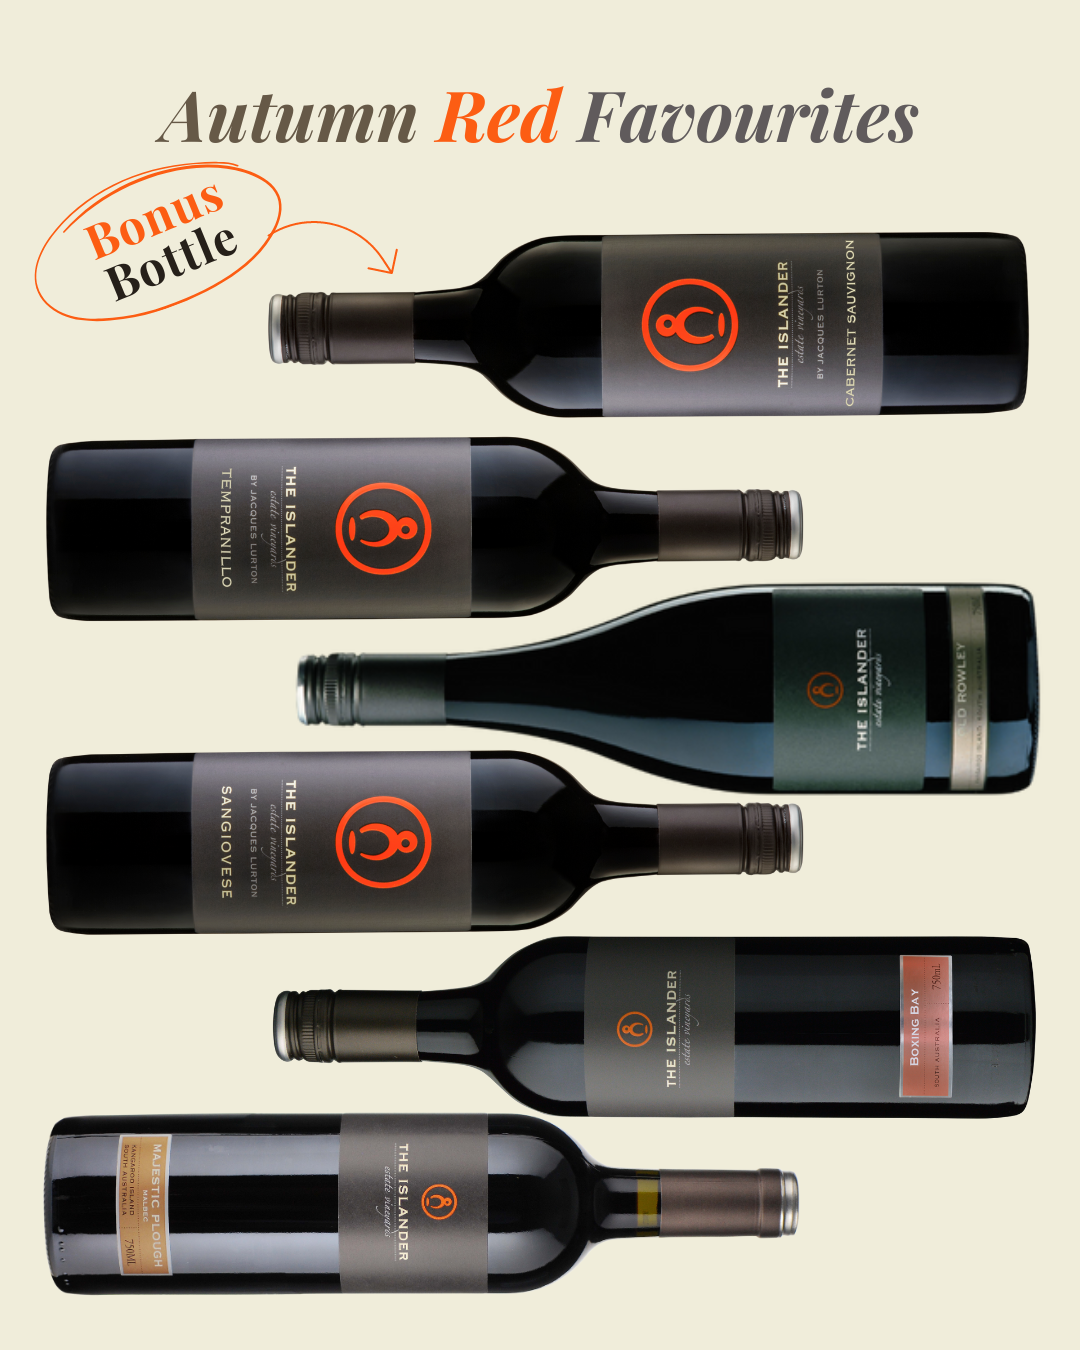 Autumn Red Favourites Wine Pack by The Islander Estate Vineyards